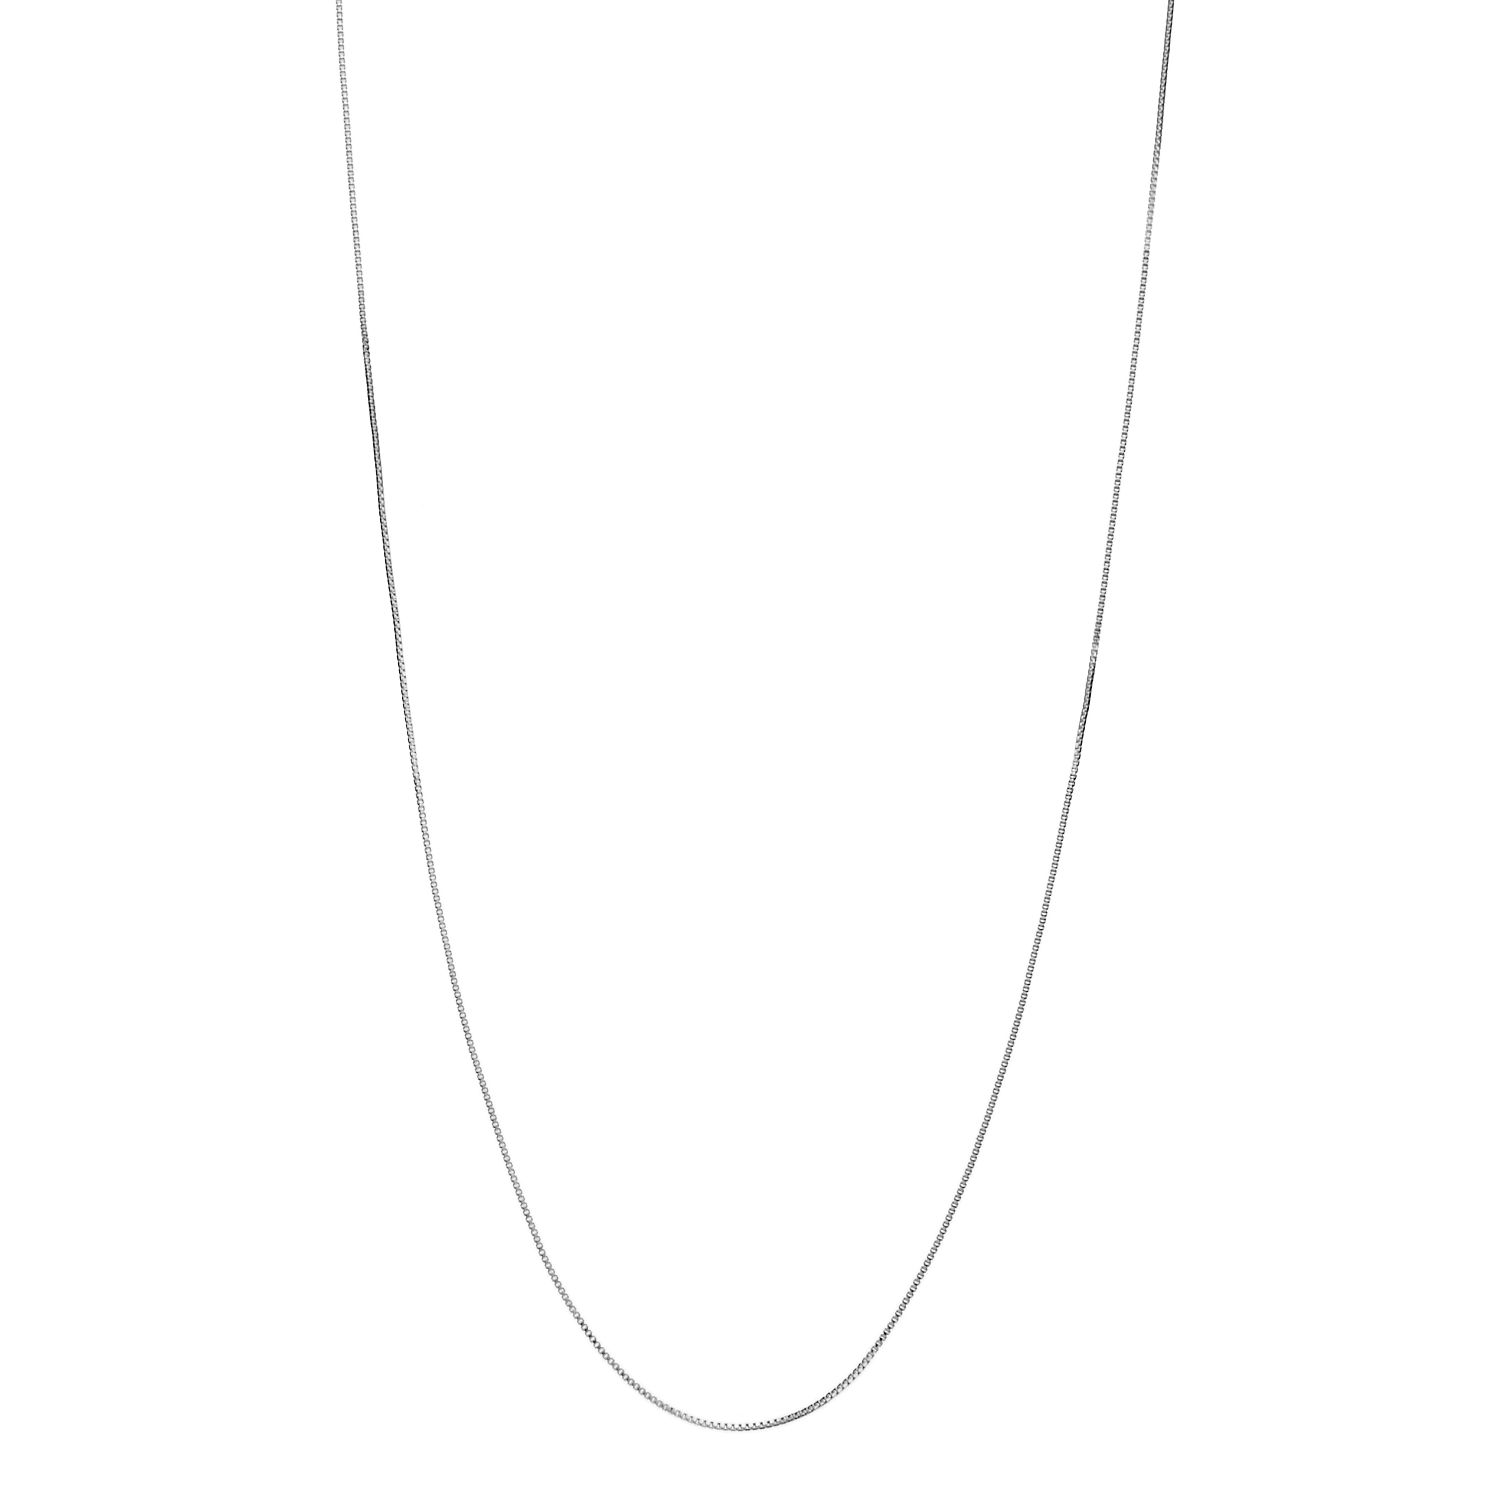 long thin silver chain necklace